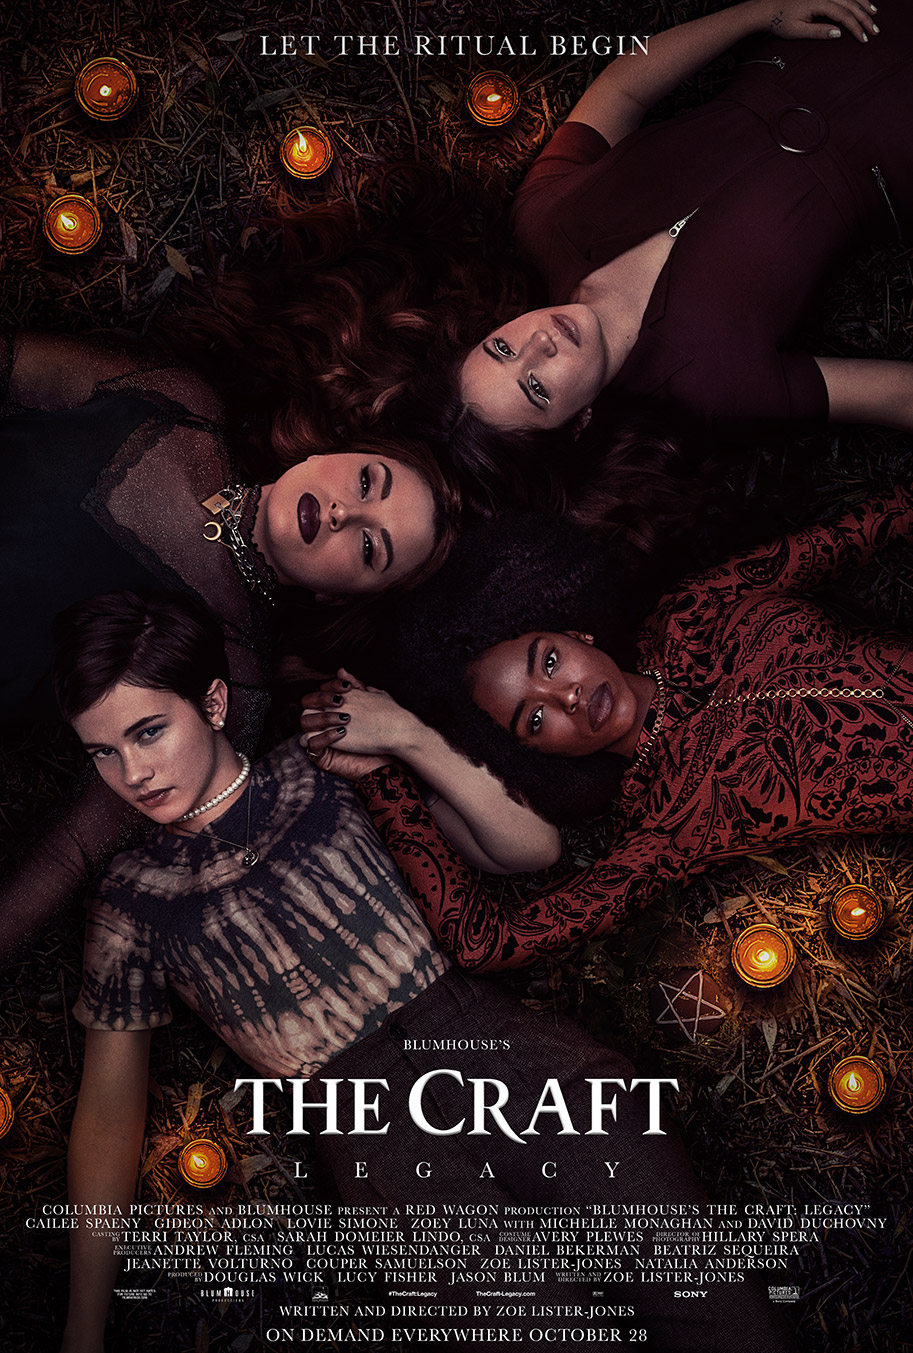 The Craft: Legacy, The Craft, Blumhouse